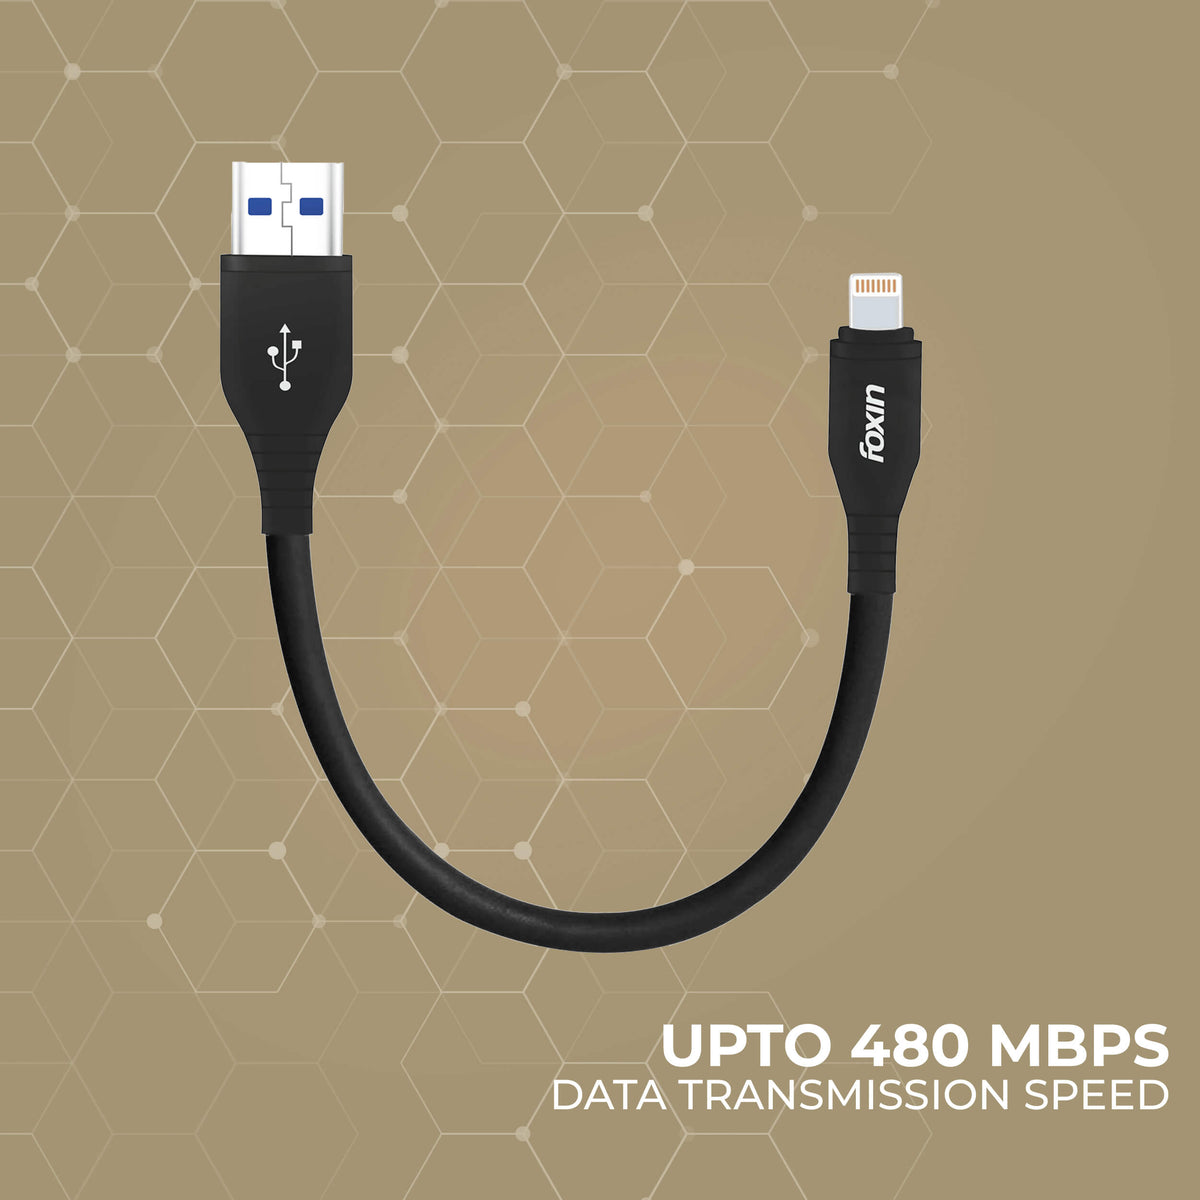 Foxin AE09 8 Pin USB Power Bank Cable